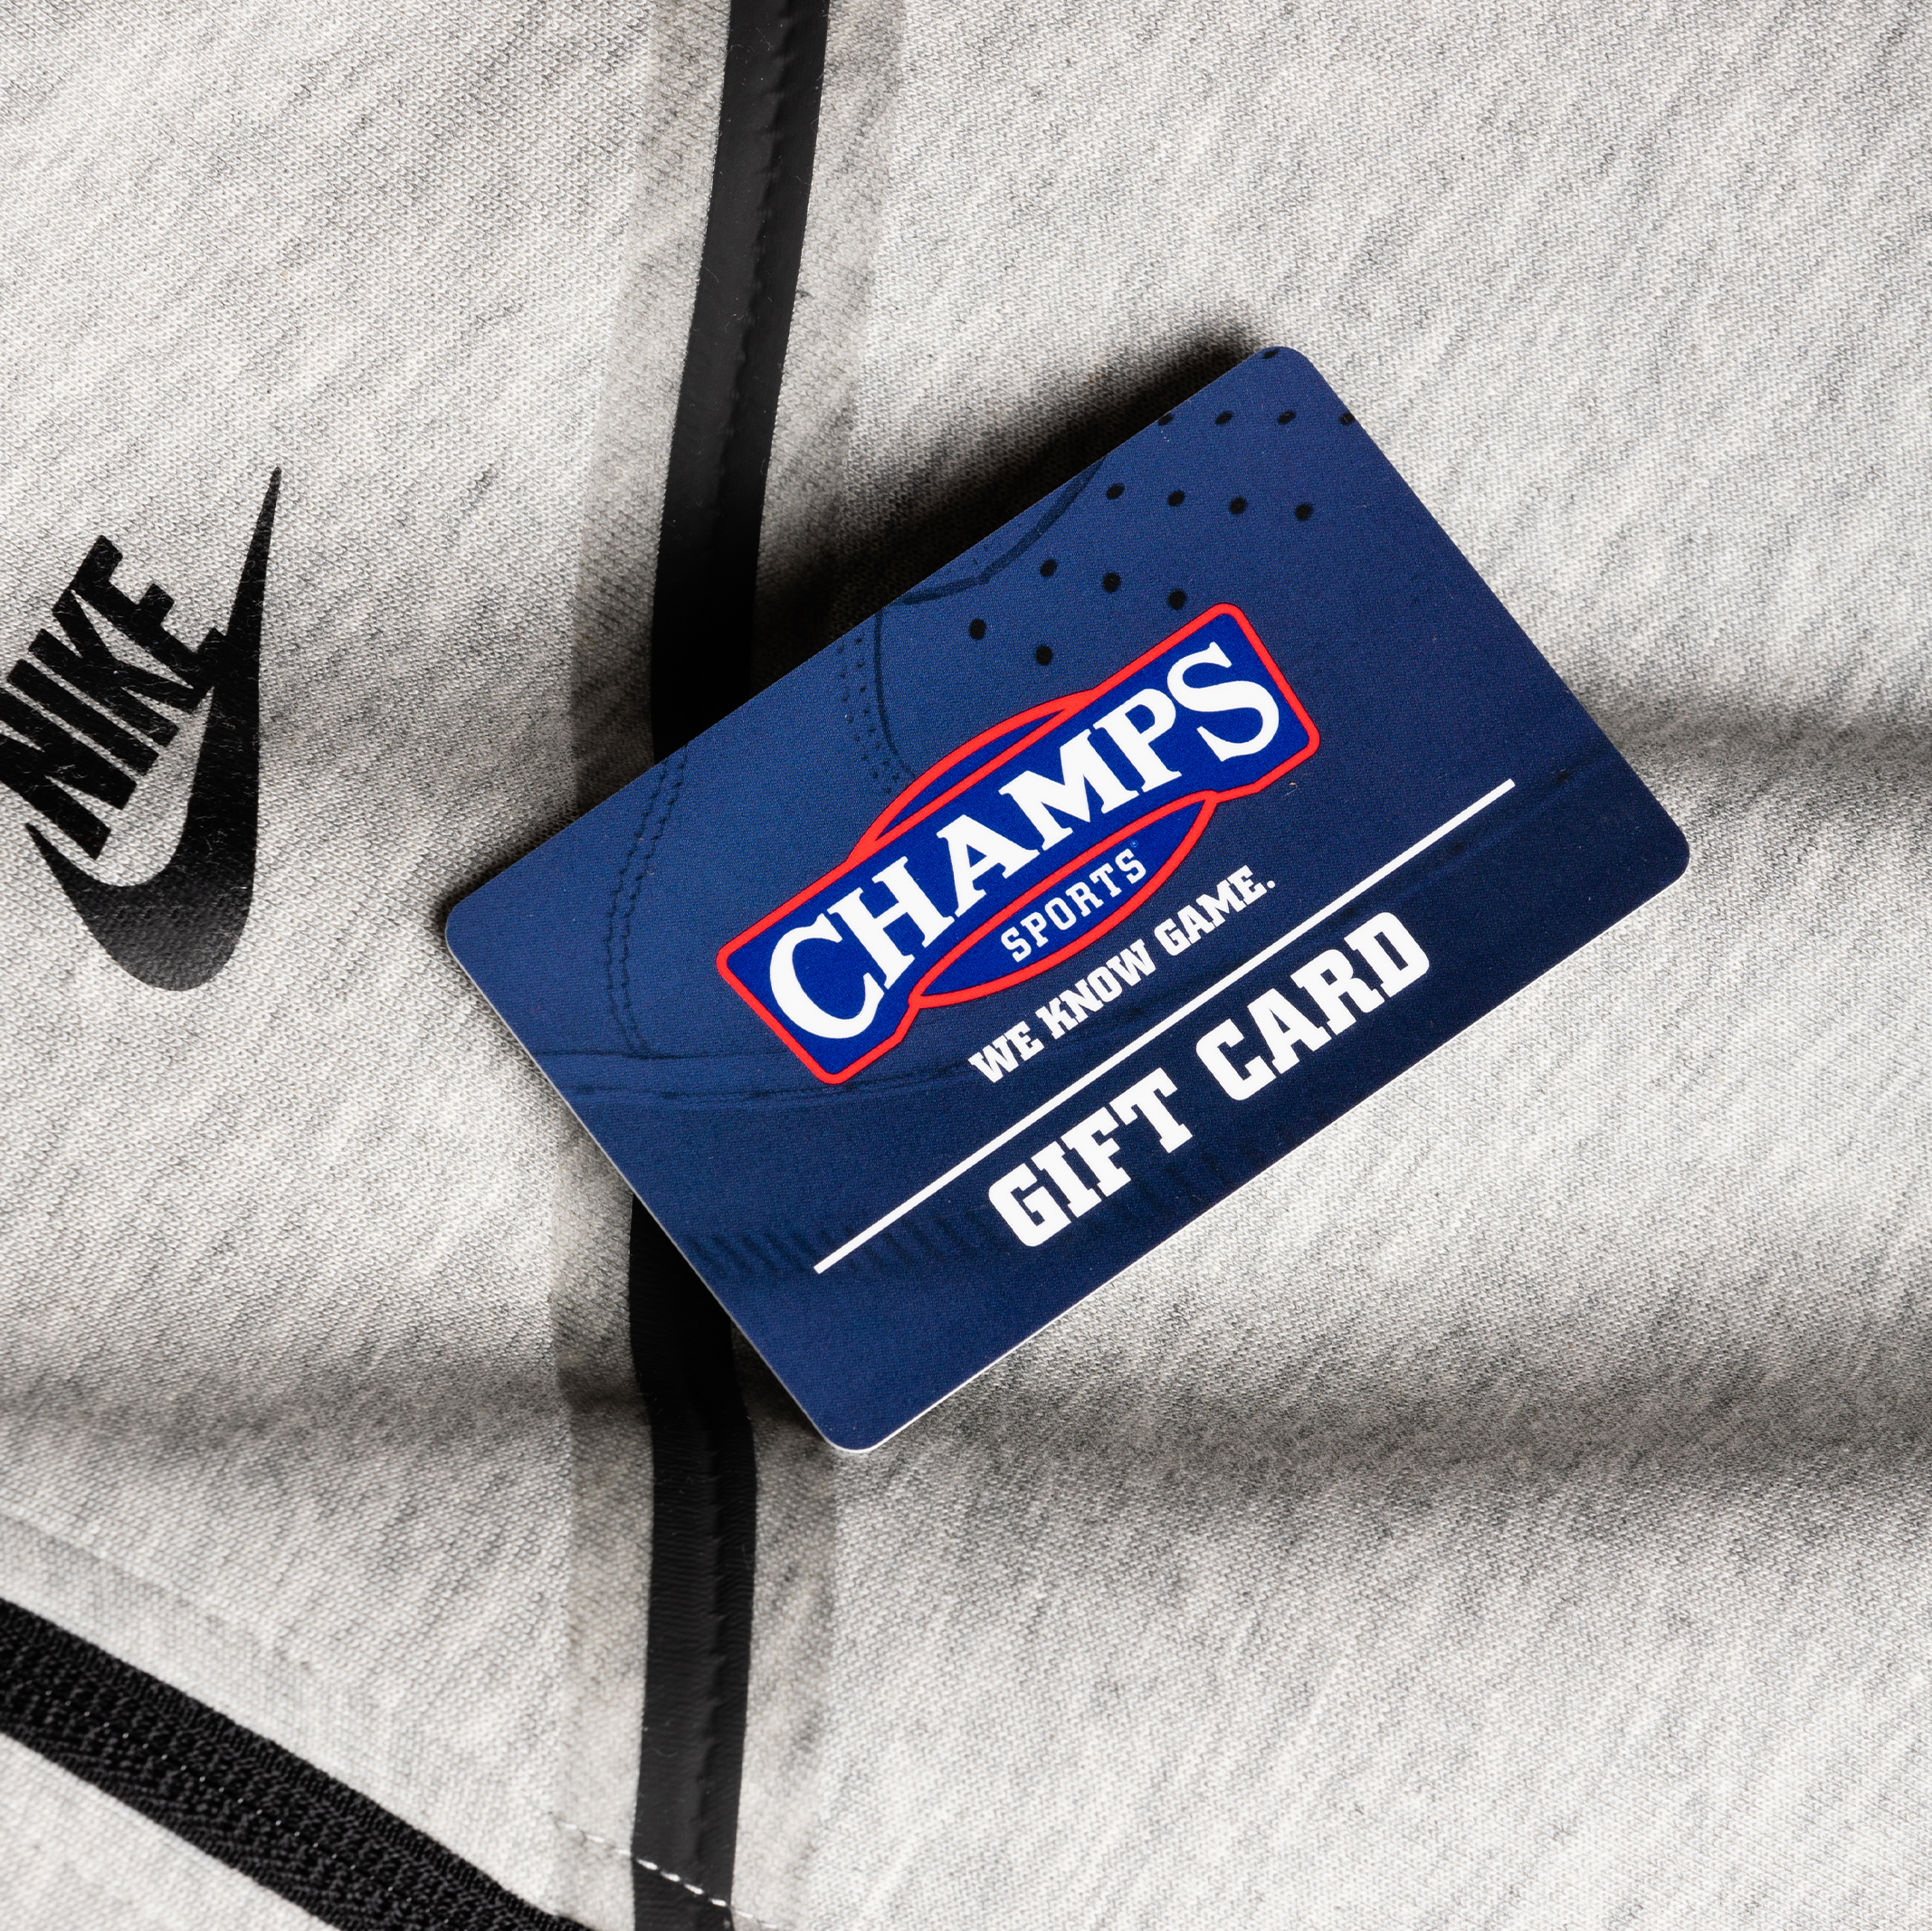 smog Goederen gisteren Champs Sports on Twitter: "Give the Gift of Game this Holiday season 💯  Champs Gift Cards and Nike Tech Fleece are available in-store and online at  Champs Sports #WeKnowGame Gift Card 